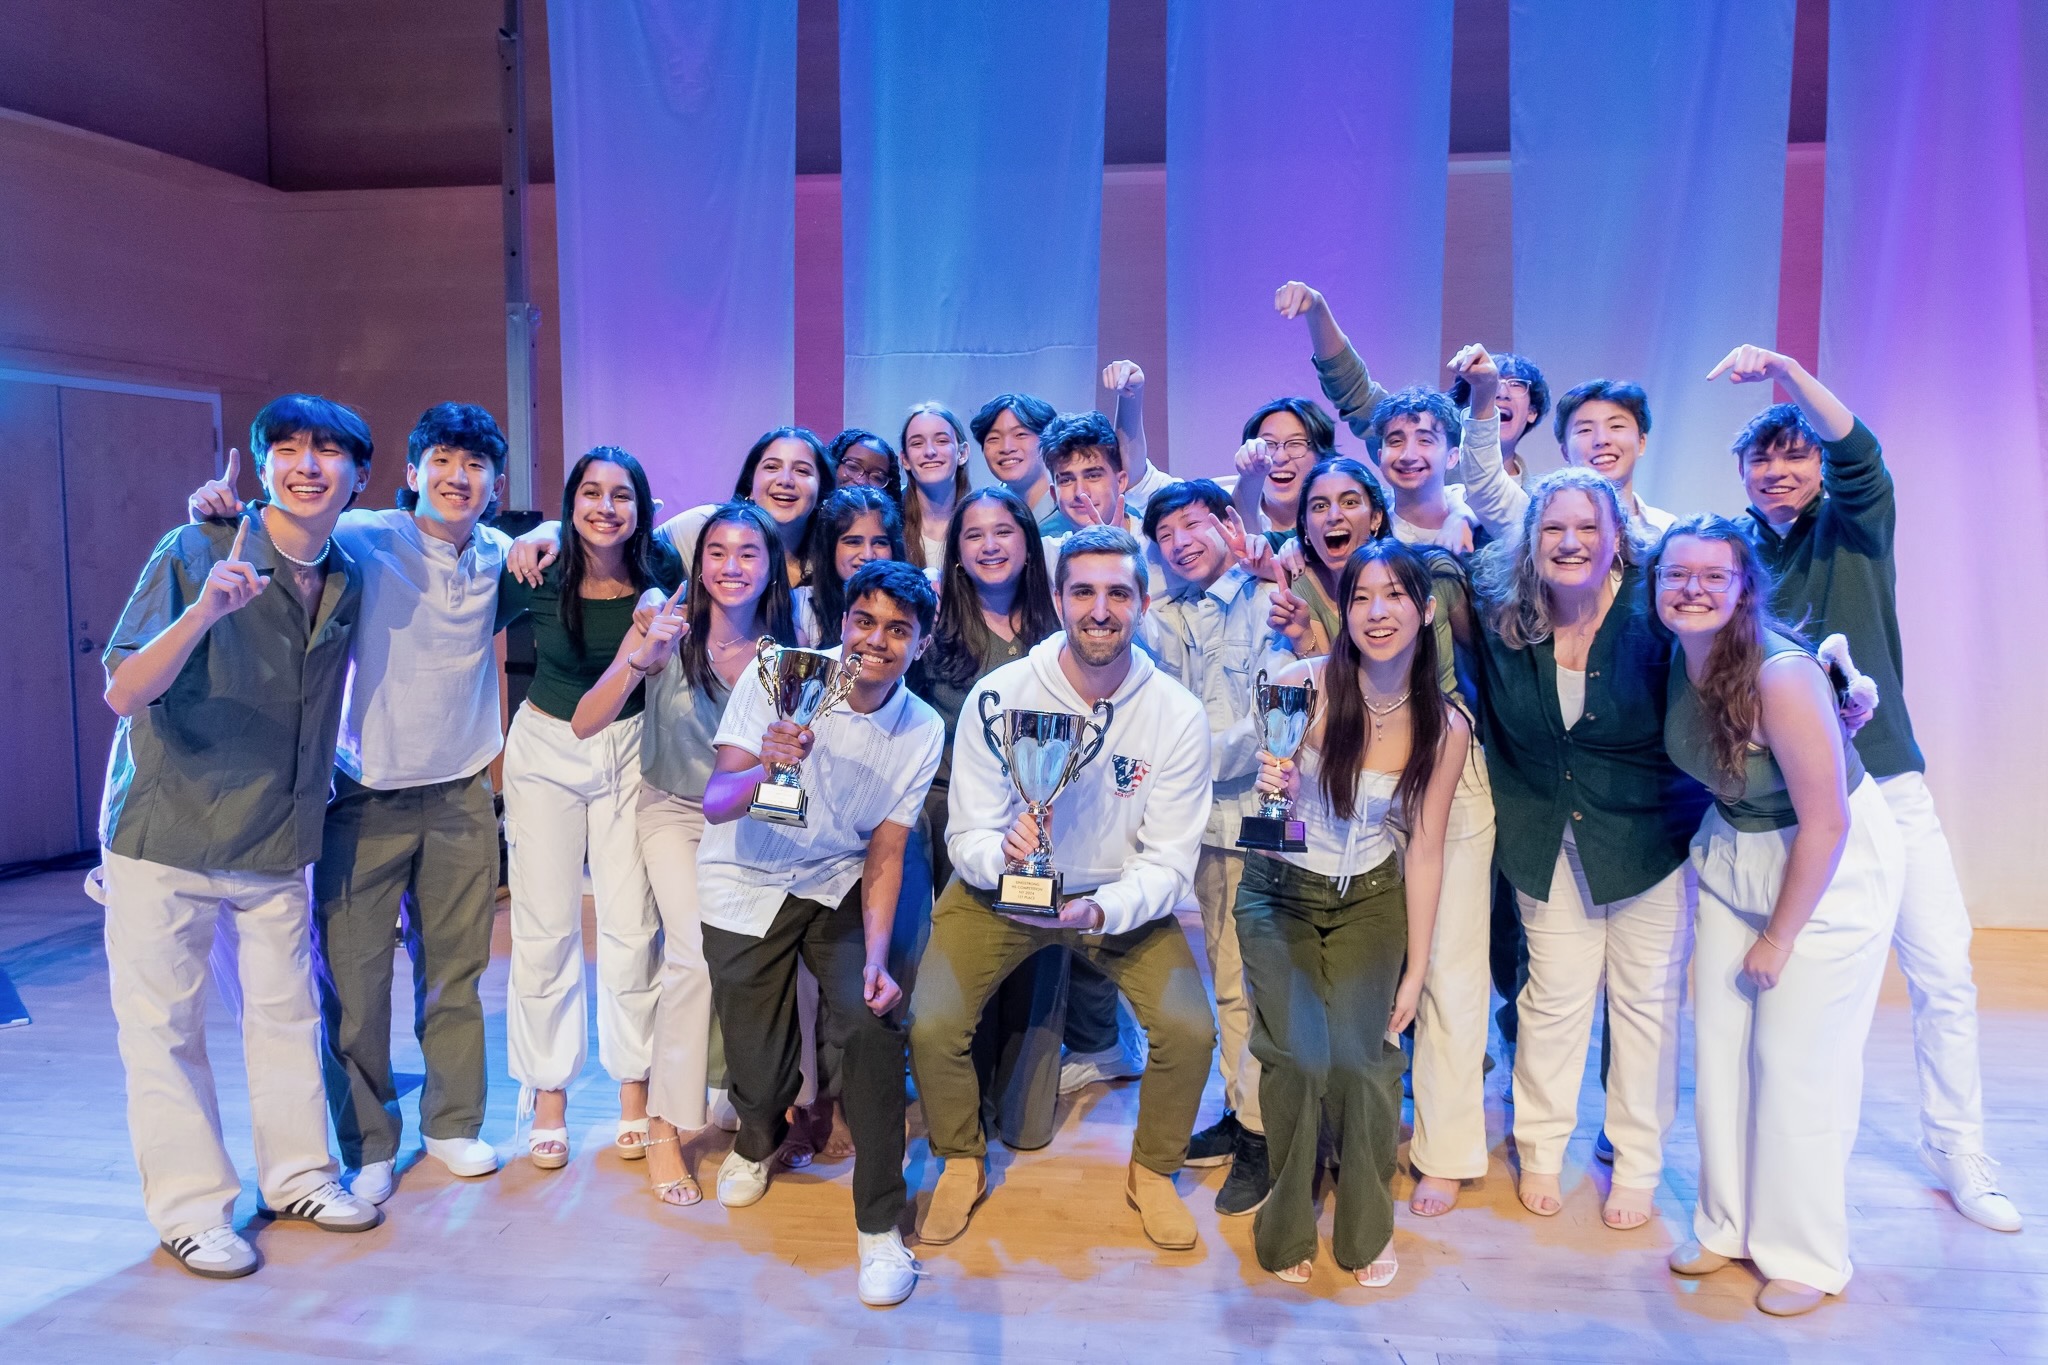 The Acatonics hold up their three trophies after winning first place at Sing Strong NY on Feb. 3, winning First Place Overall, Best Soloist (Ashley Chan) and Best Vocal Percussionist (Shravan Kannepalli).